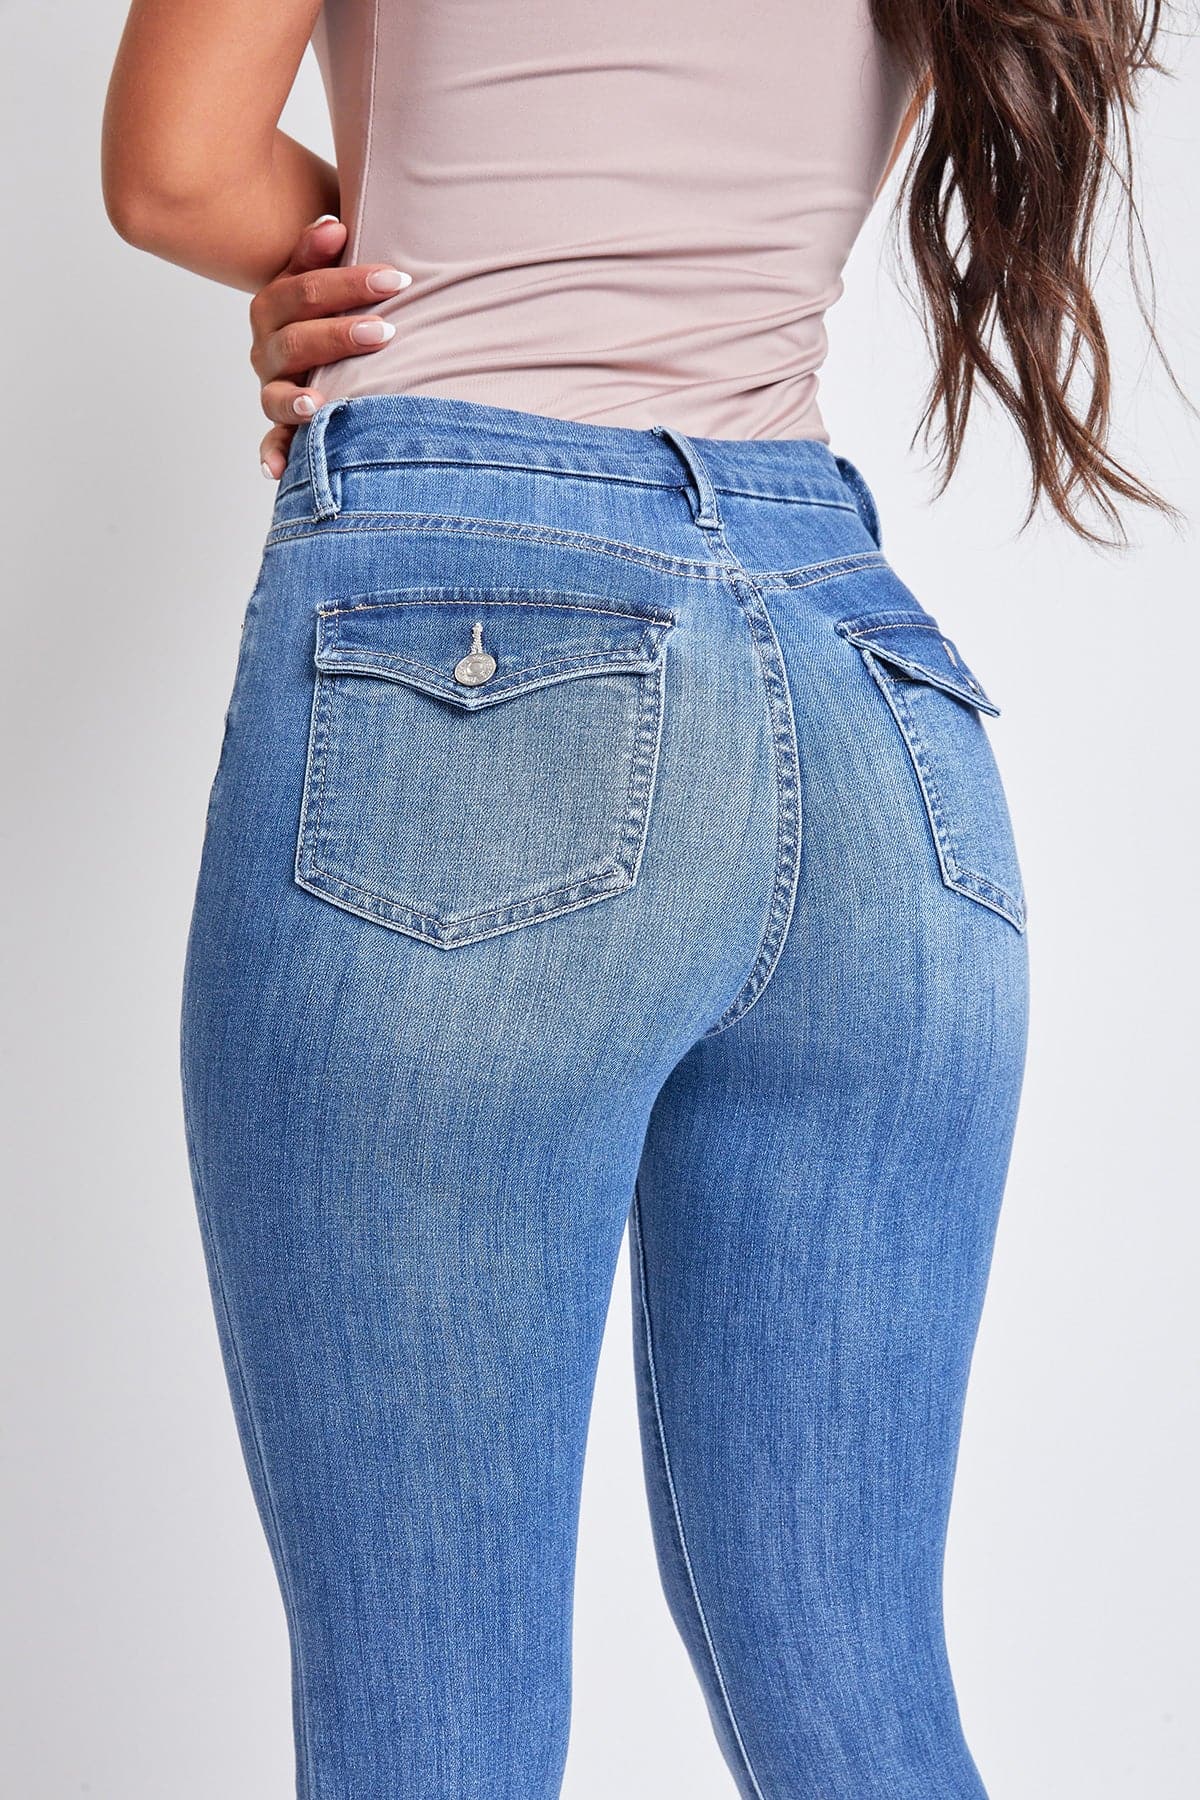 Women's Curvy Fit Ultra High Rise Bootcut Jeans